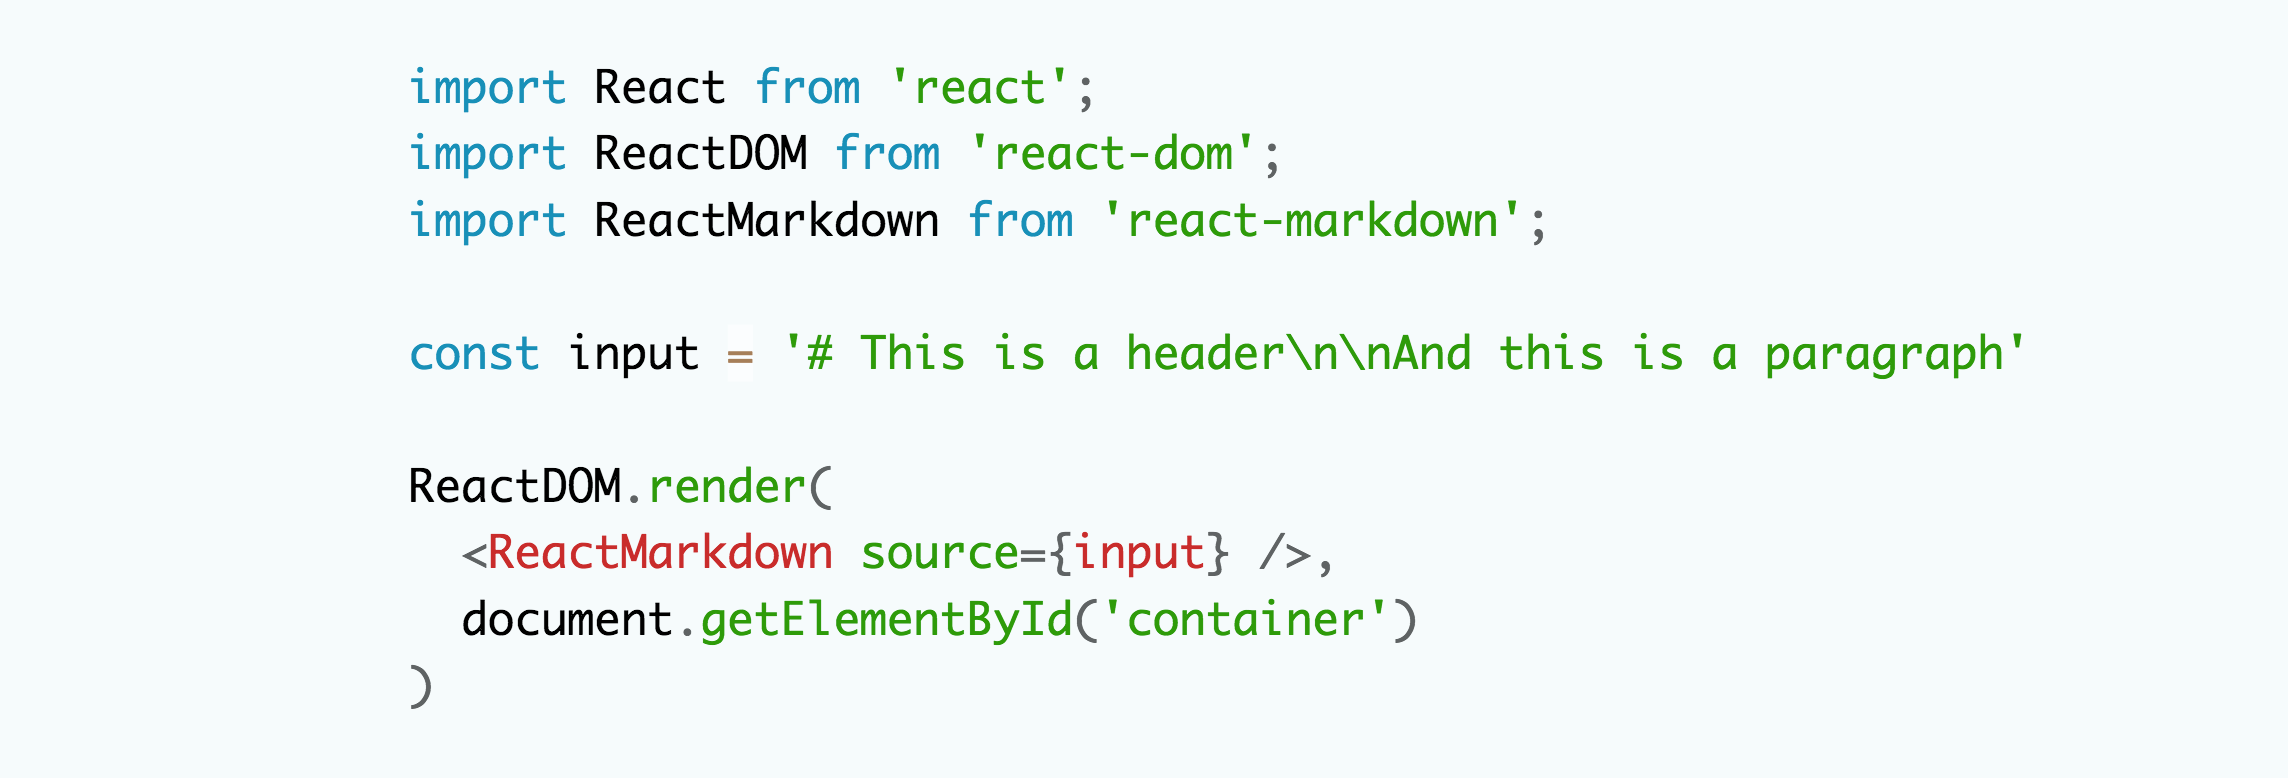 React Markdown — Code and Syntax Highlighting | by Bexultan Myrzatay |  Young Developer | Medium